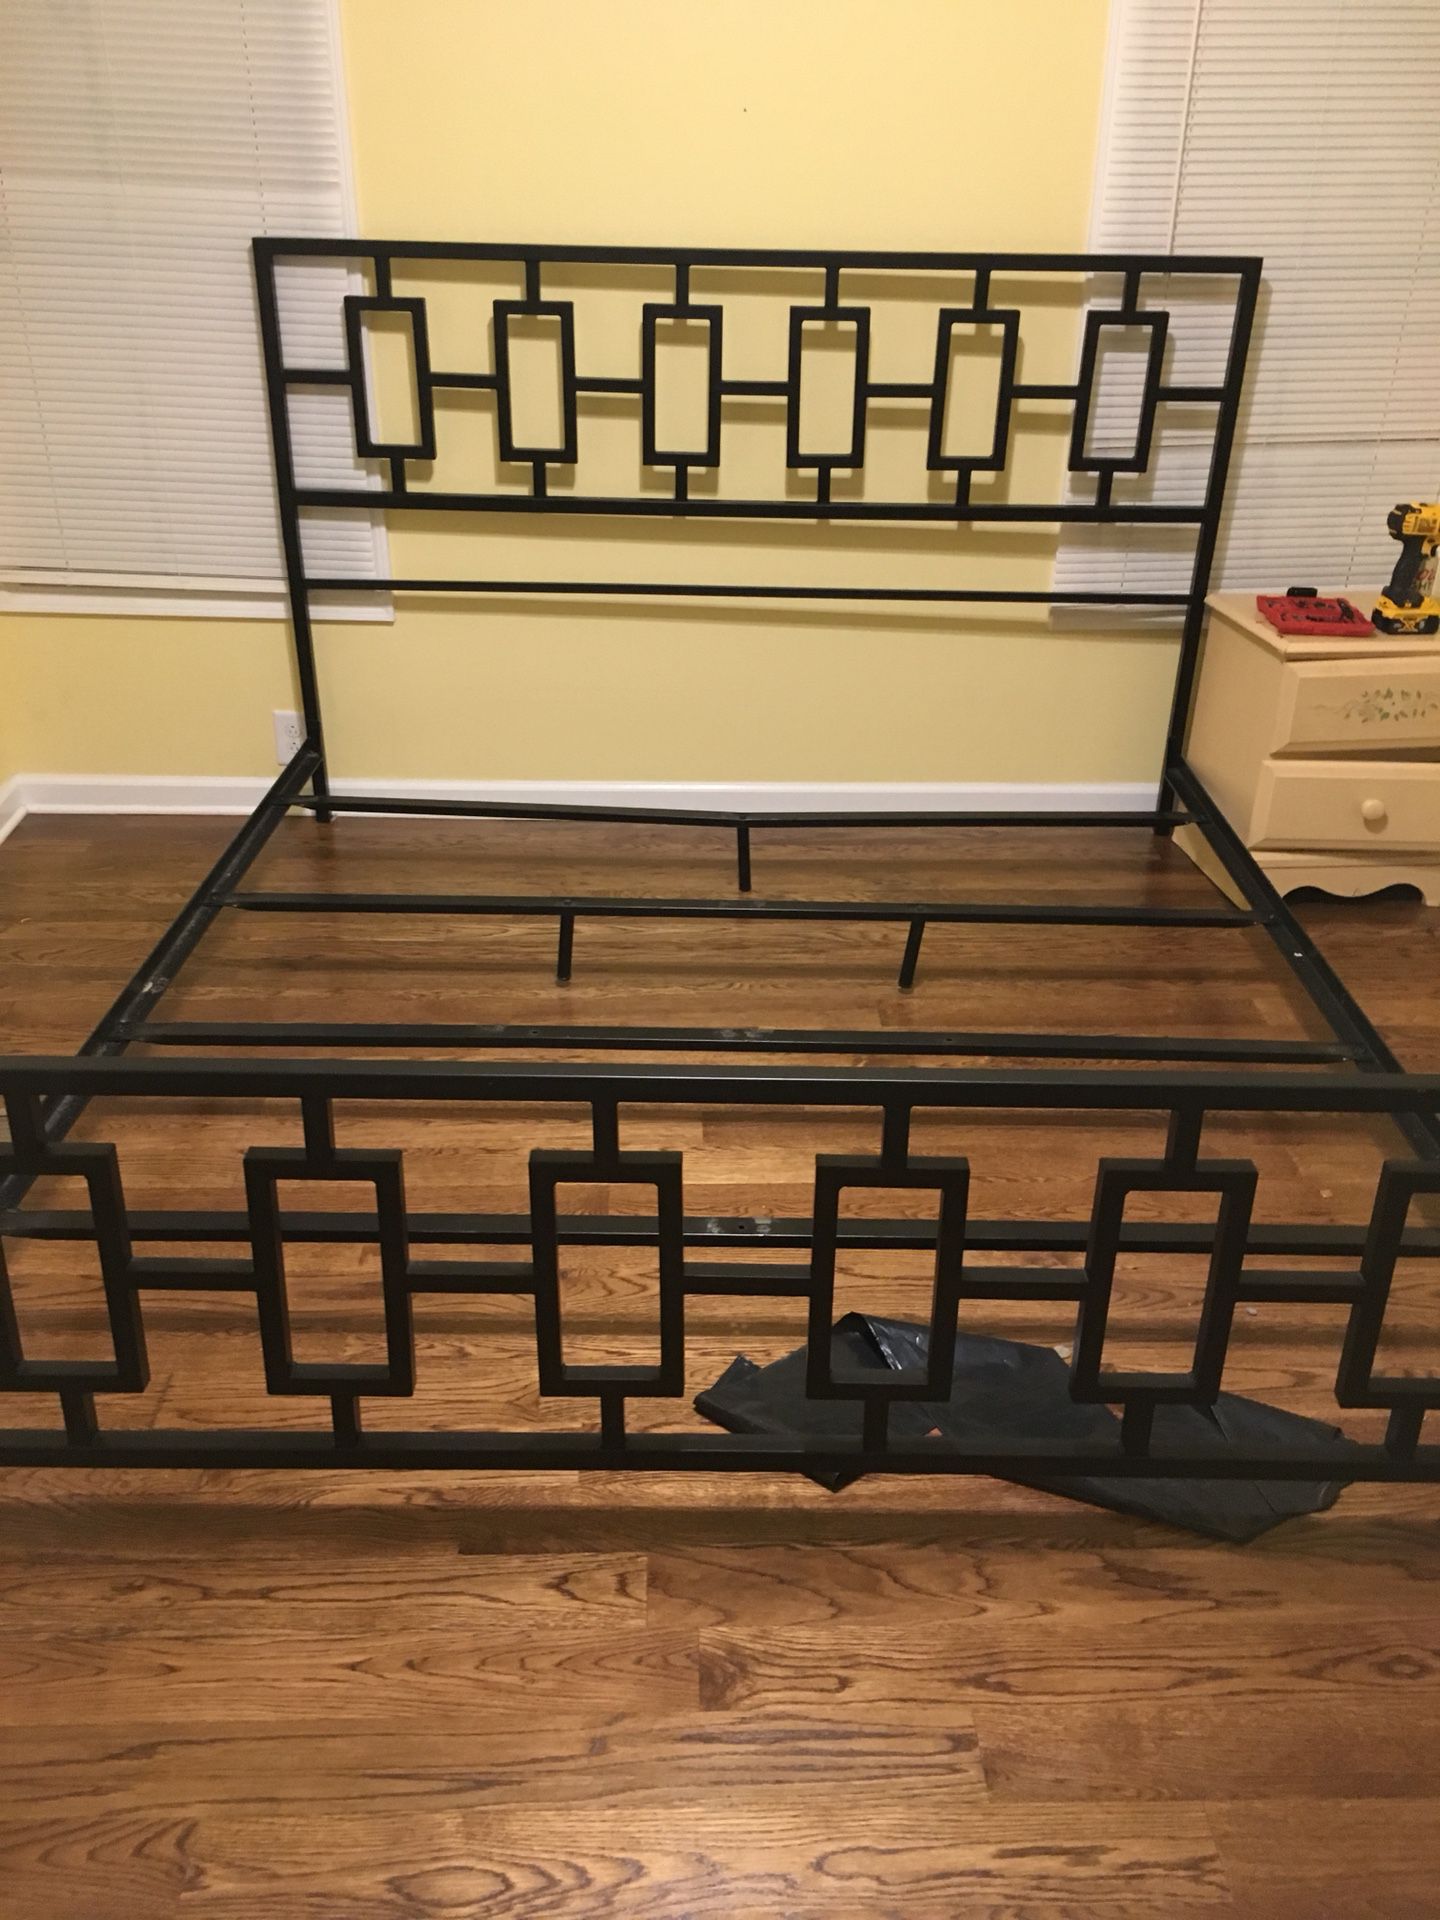 Full size bed mattress box springs and bed frame